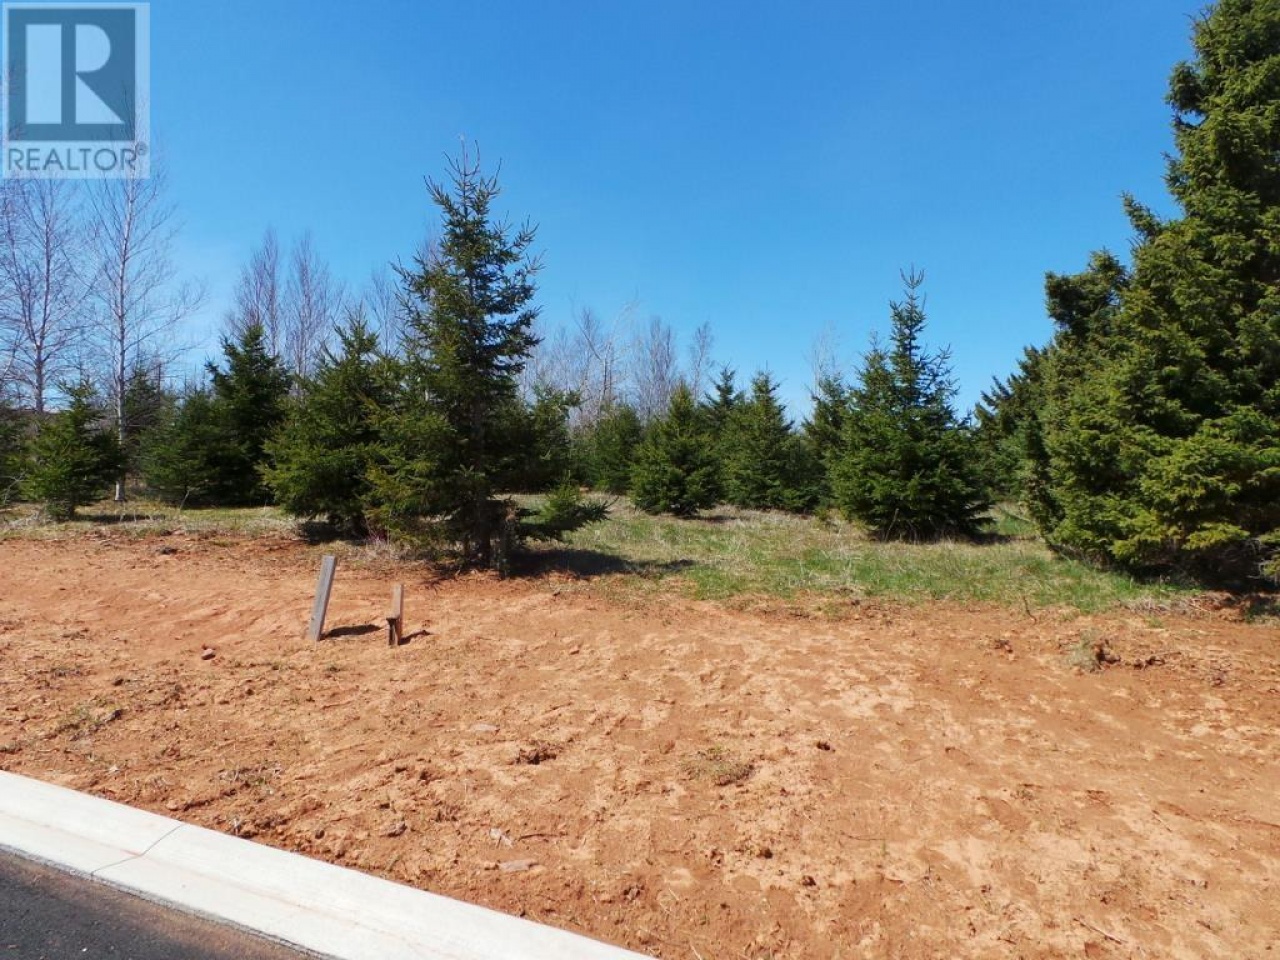 Lot 20-10 Waterview HeightsLot 20-10 Waterview Heights, Summerside, Prince Edward Island C1N6H5, ,Vacant Land,For Sale,Lot 20-10 Waterview Heights,202111415